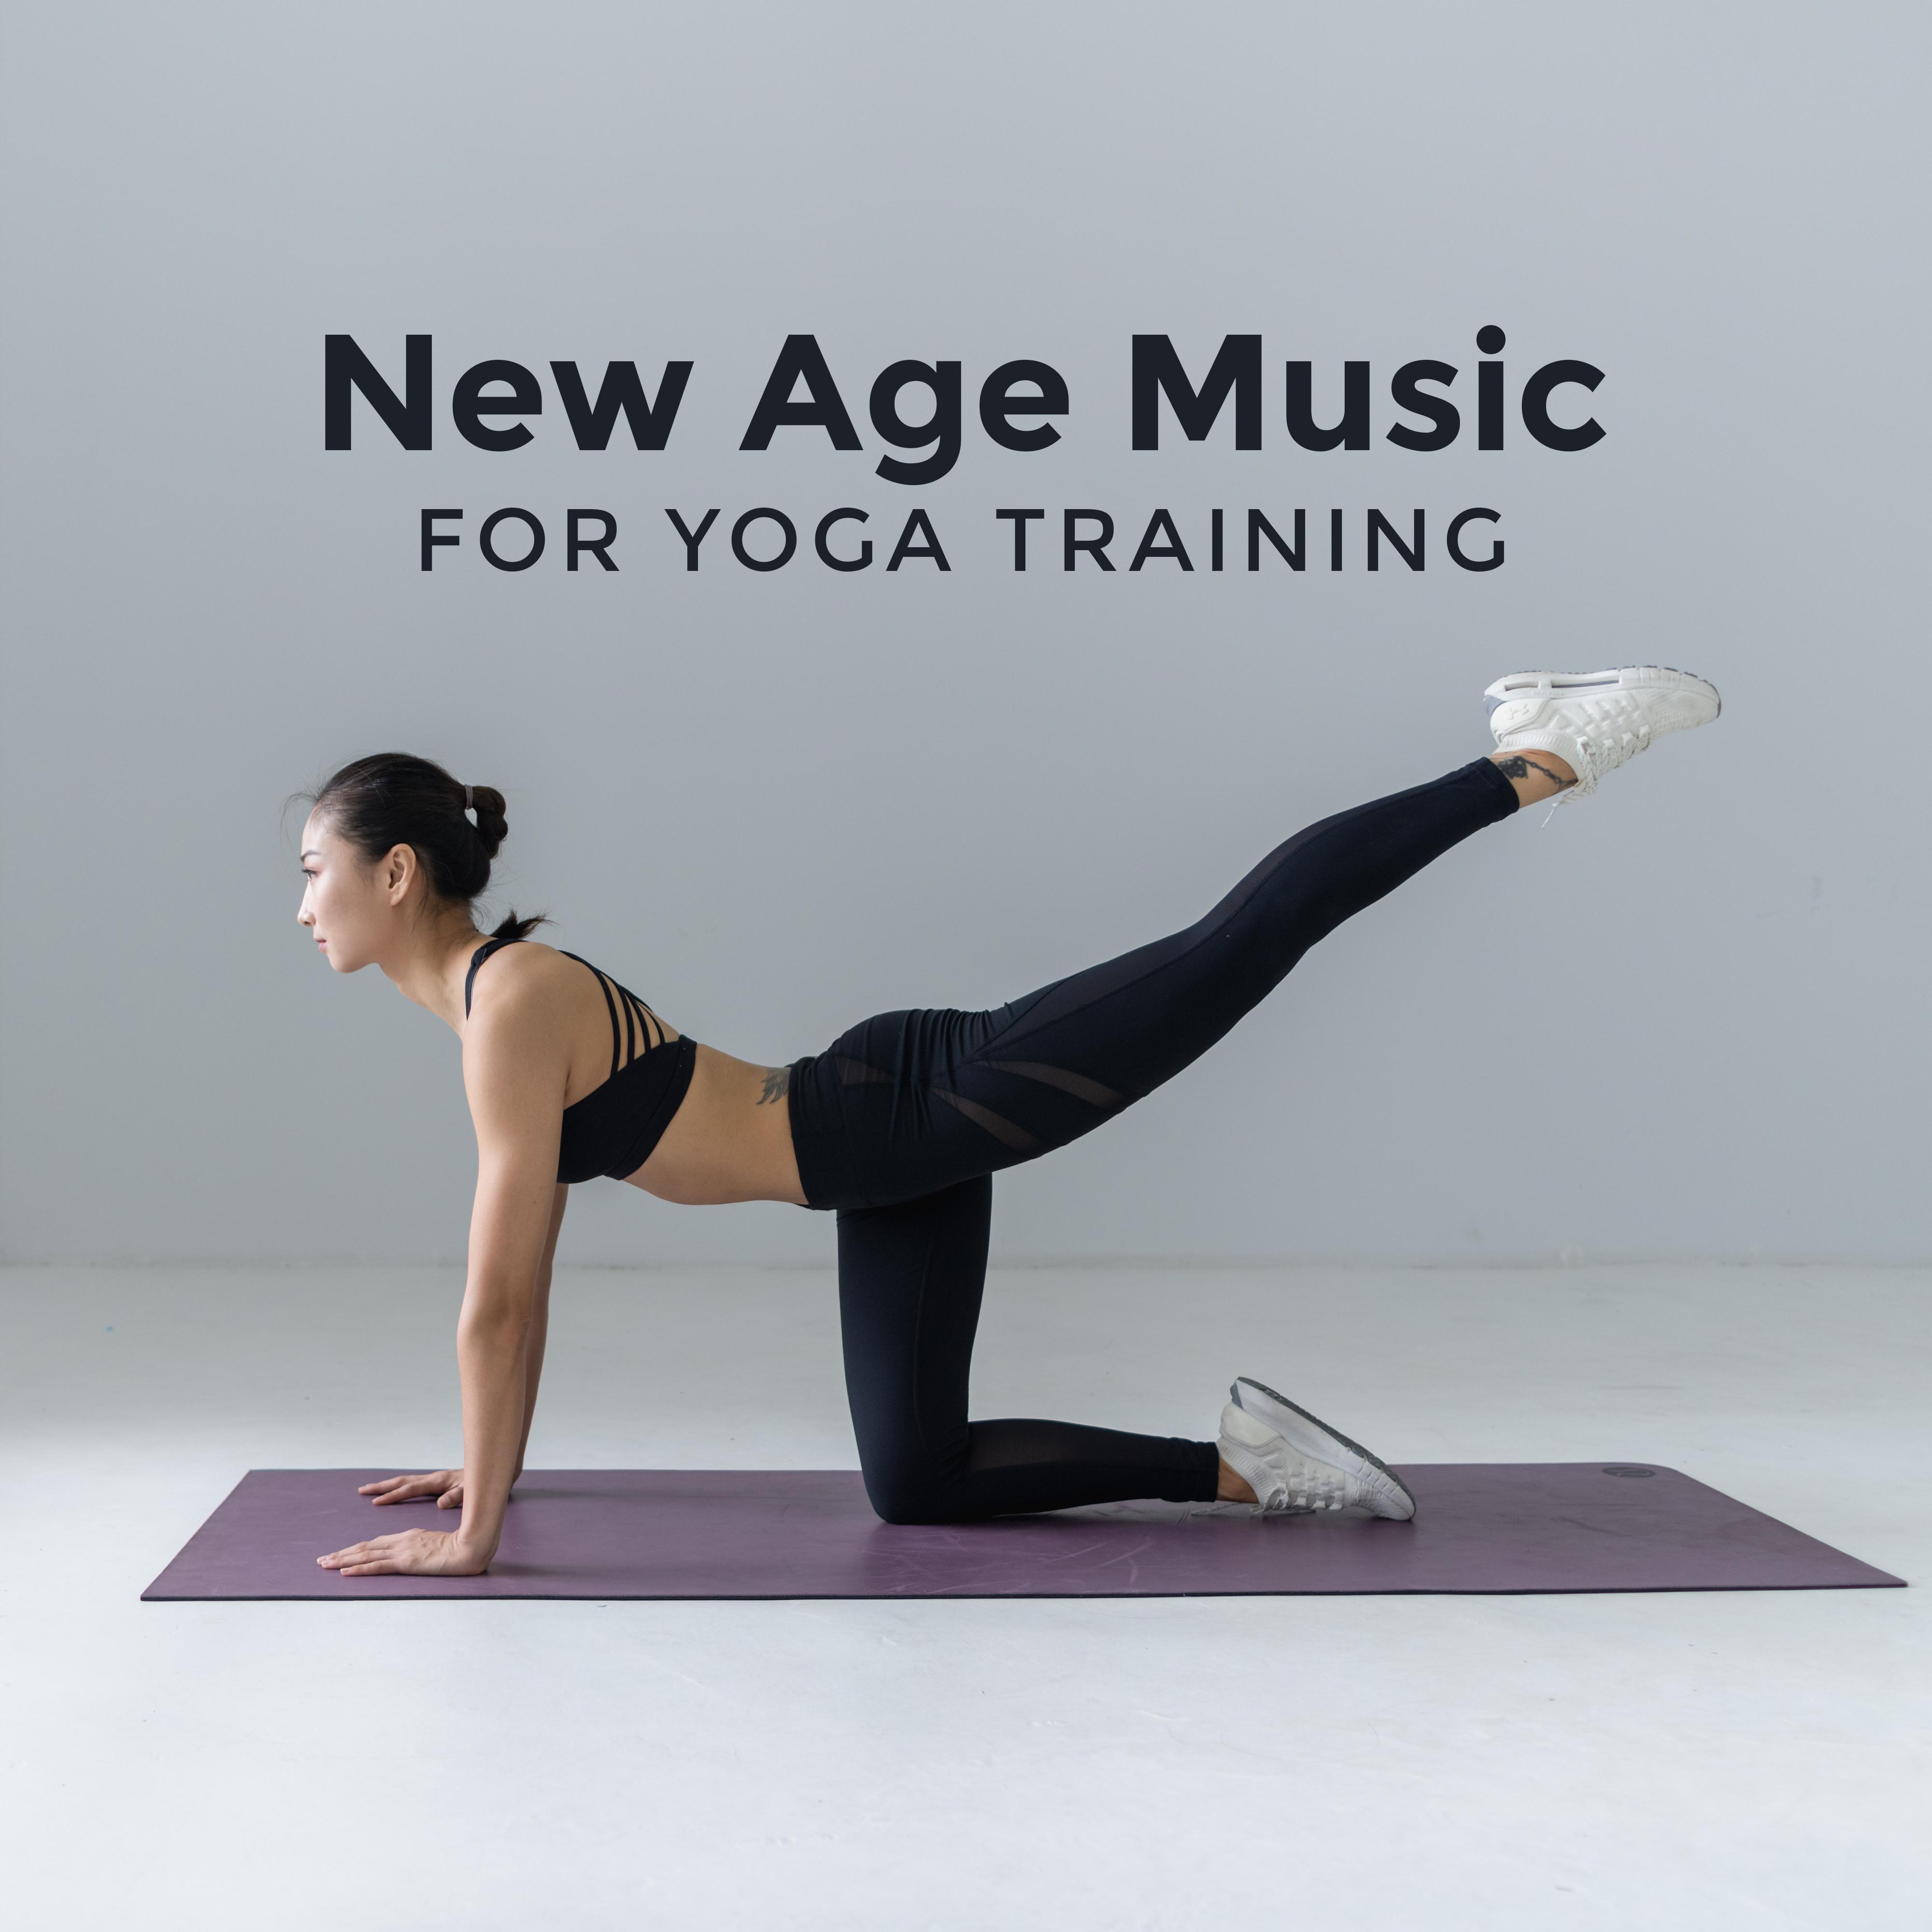 New Age Music for Yoga Training: Relaxing Sounds, Deep Meditation, Mindfulness Relaxation, Spiritual Awakening, Inner Focus, Calming Vibes